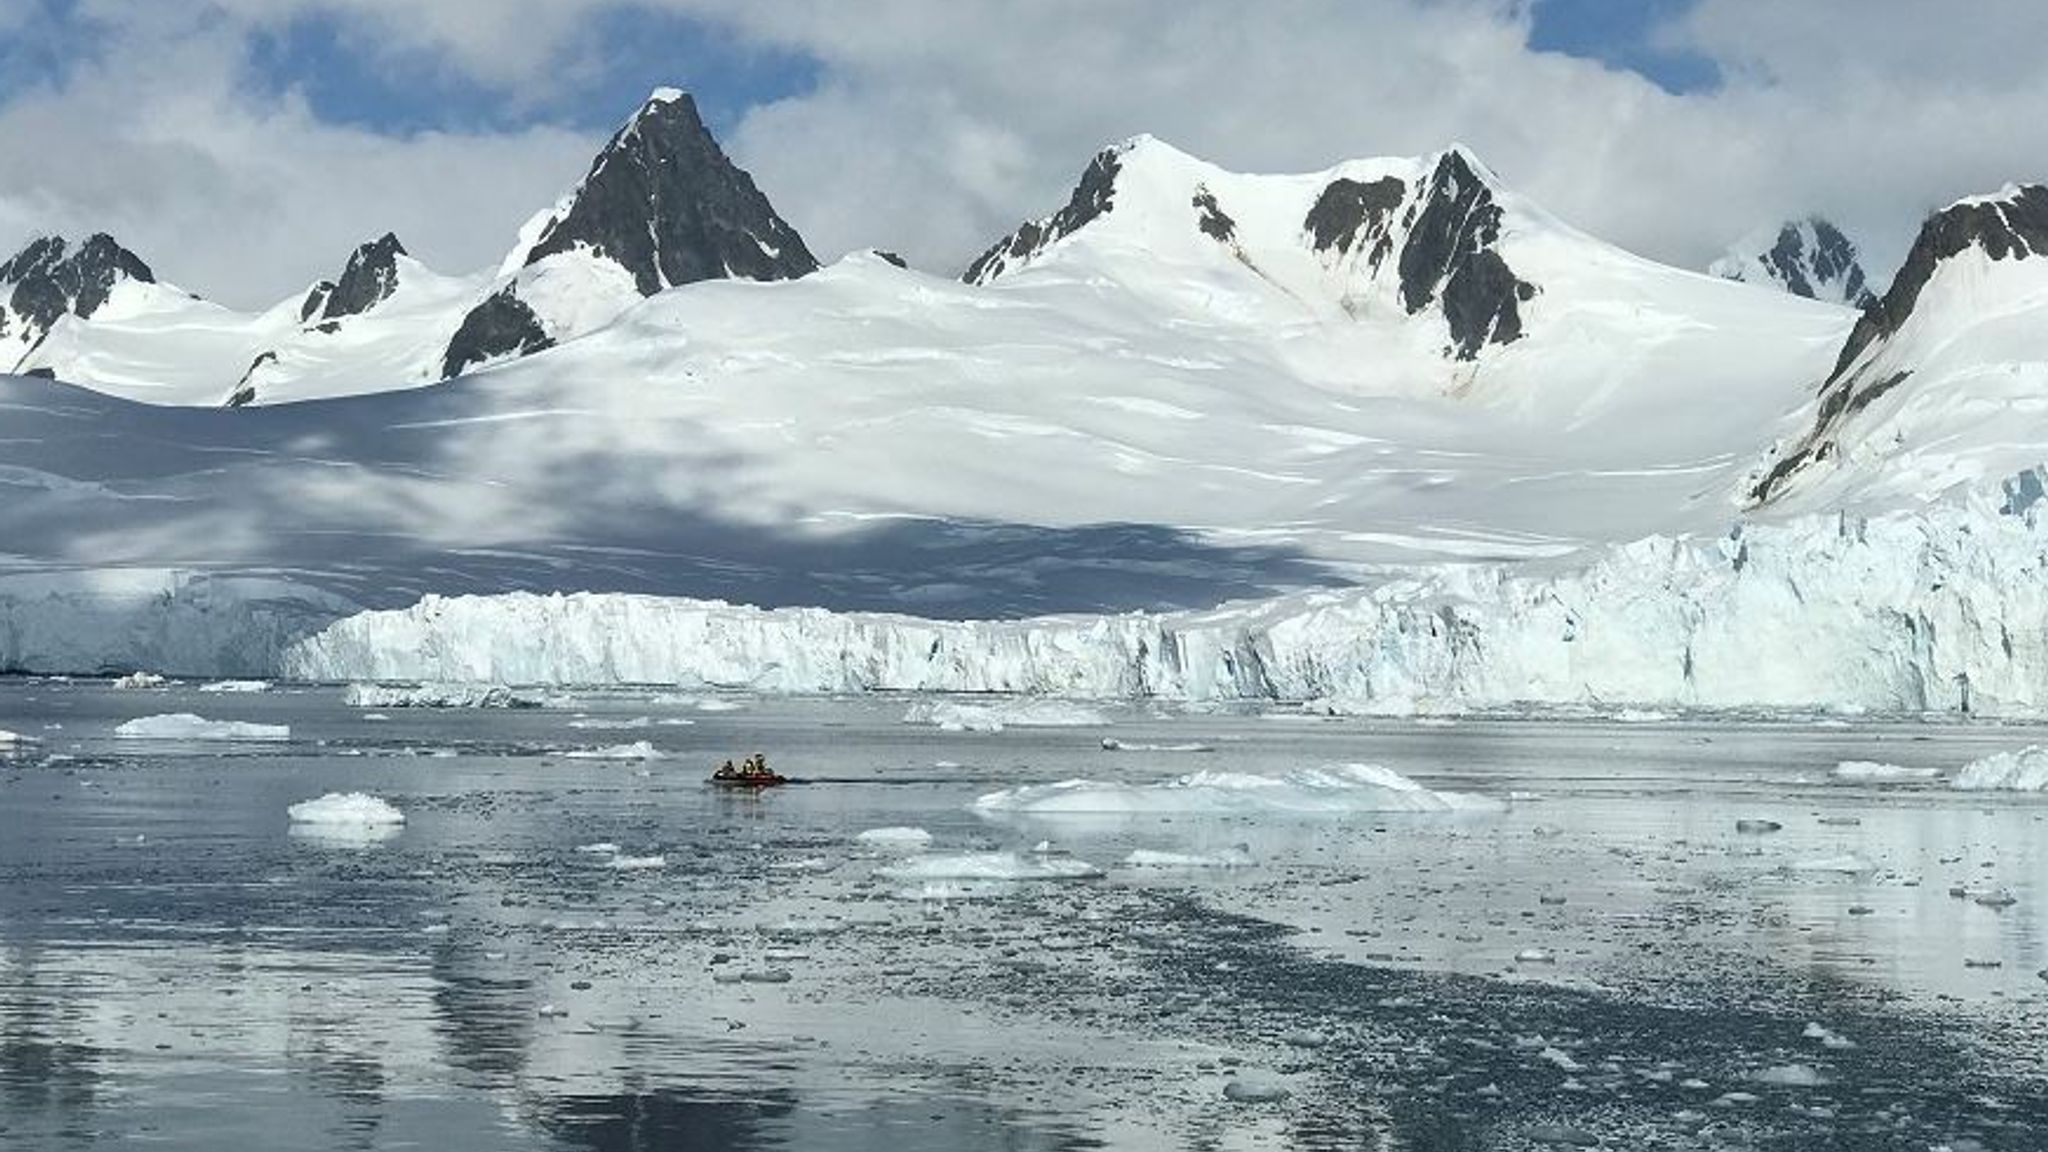 Daily updates as Sky heads into Antarctic wilderness | Climate